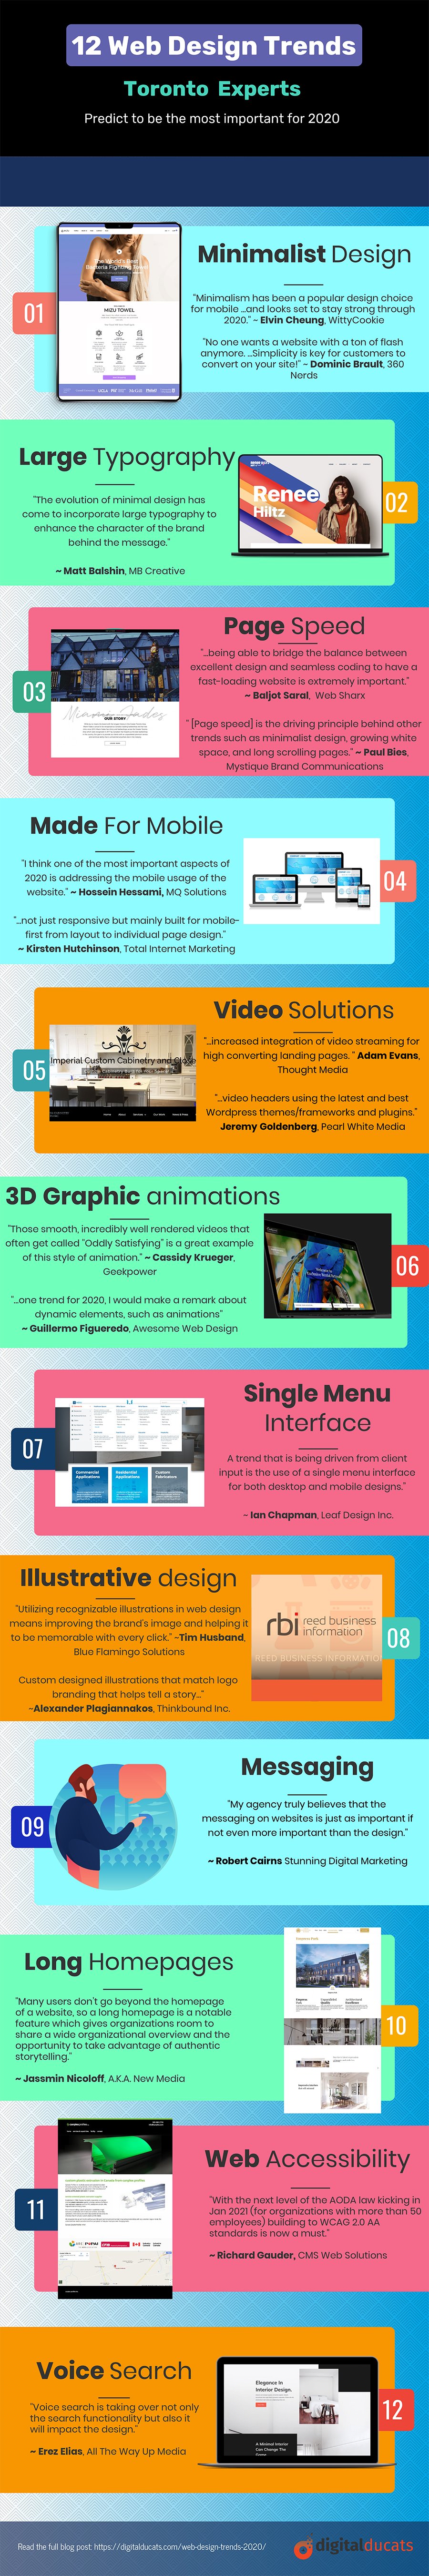 Infographic on 12 web design trends For 2020 that Toronto web design experts predict will be prevalent throughout the year